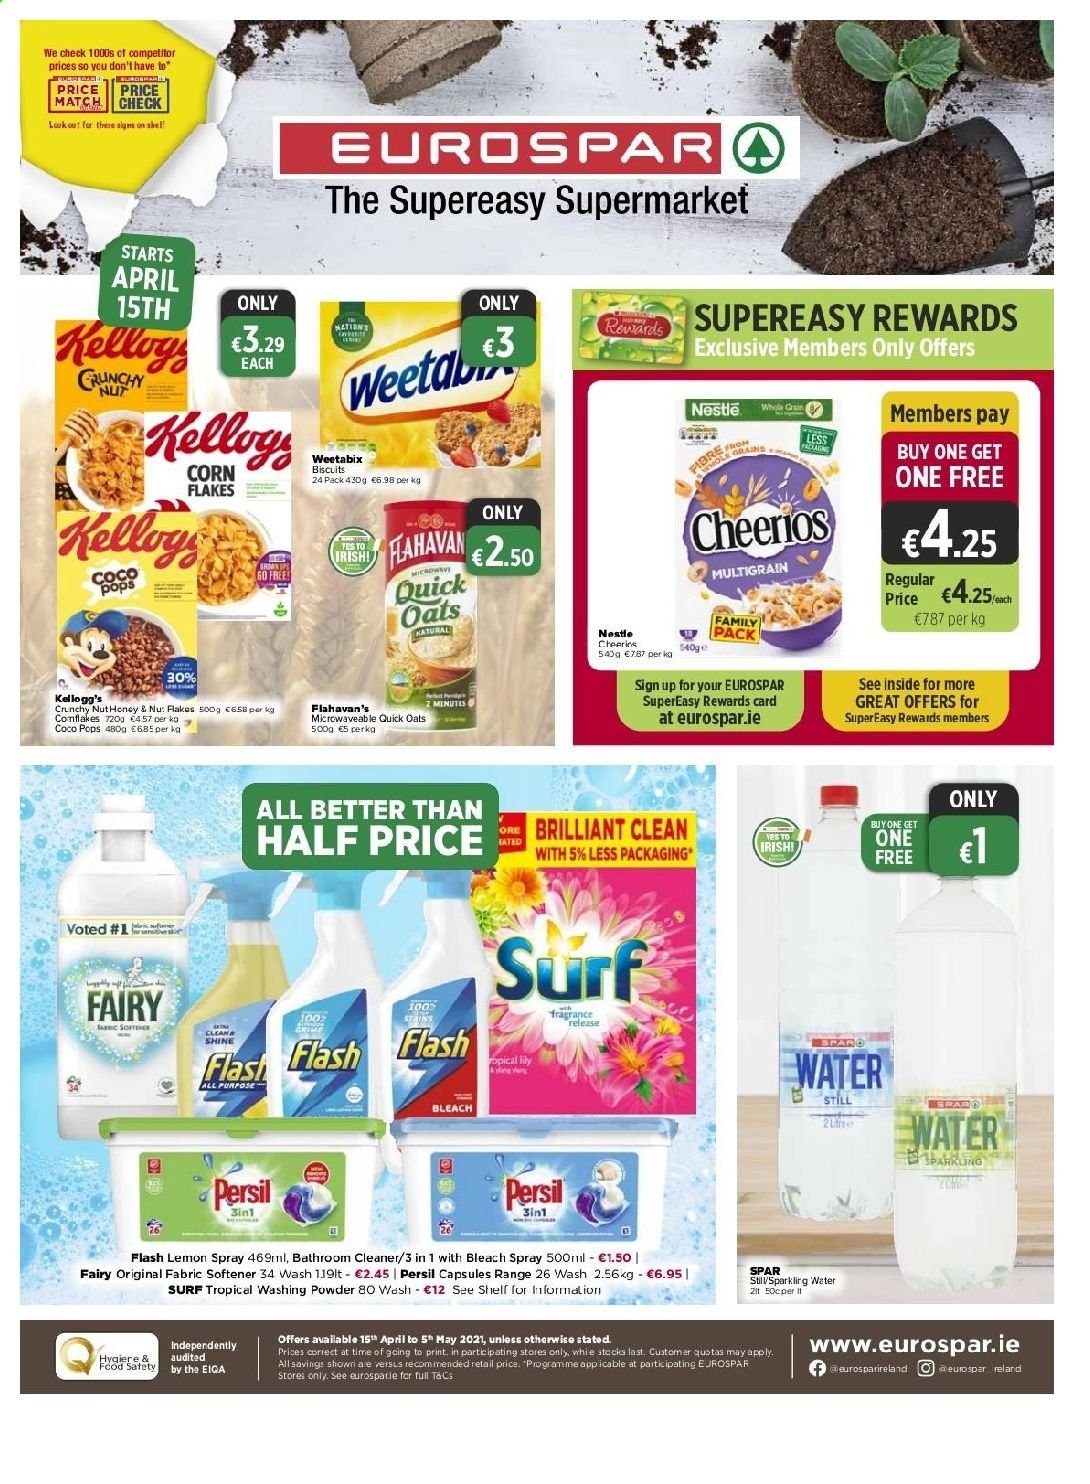 thumbnail - EUROSPAR offer  - 15.04.2021 - 05.05.2021 - Sales products - Nestlé, biscuit, oats, Cheerios, corn flakes, coco pops, Weetabix, Quick Oats, cleaner, bleach, Fairy, Persil, fabric softener, laundry powder, Surf, fragrance. Page 1.